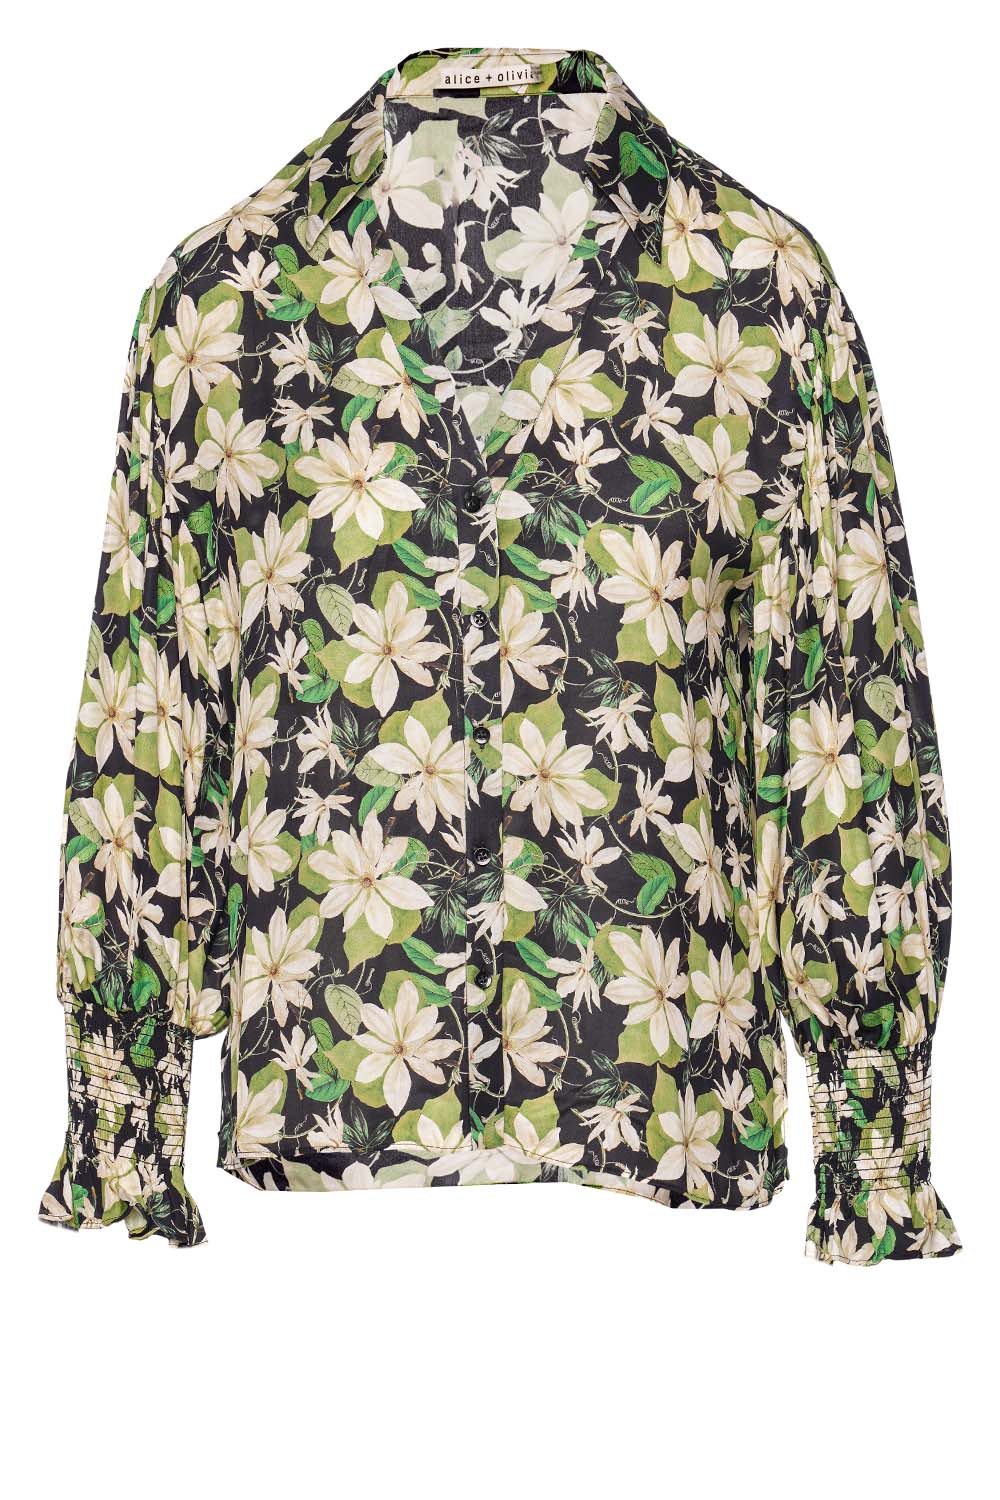 ALICE + OLIVIA Julius Moonlight Floral Button Down Blouse